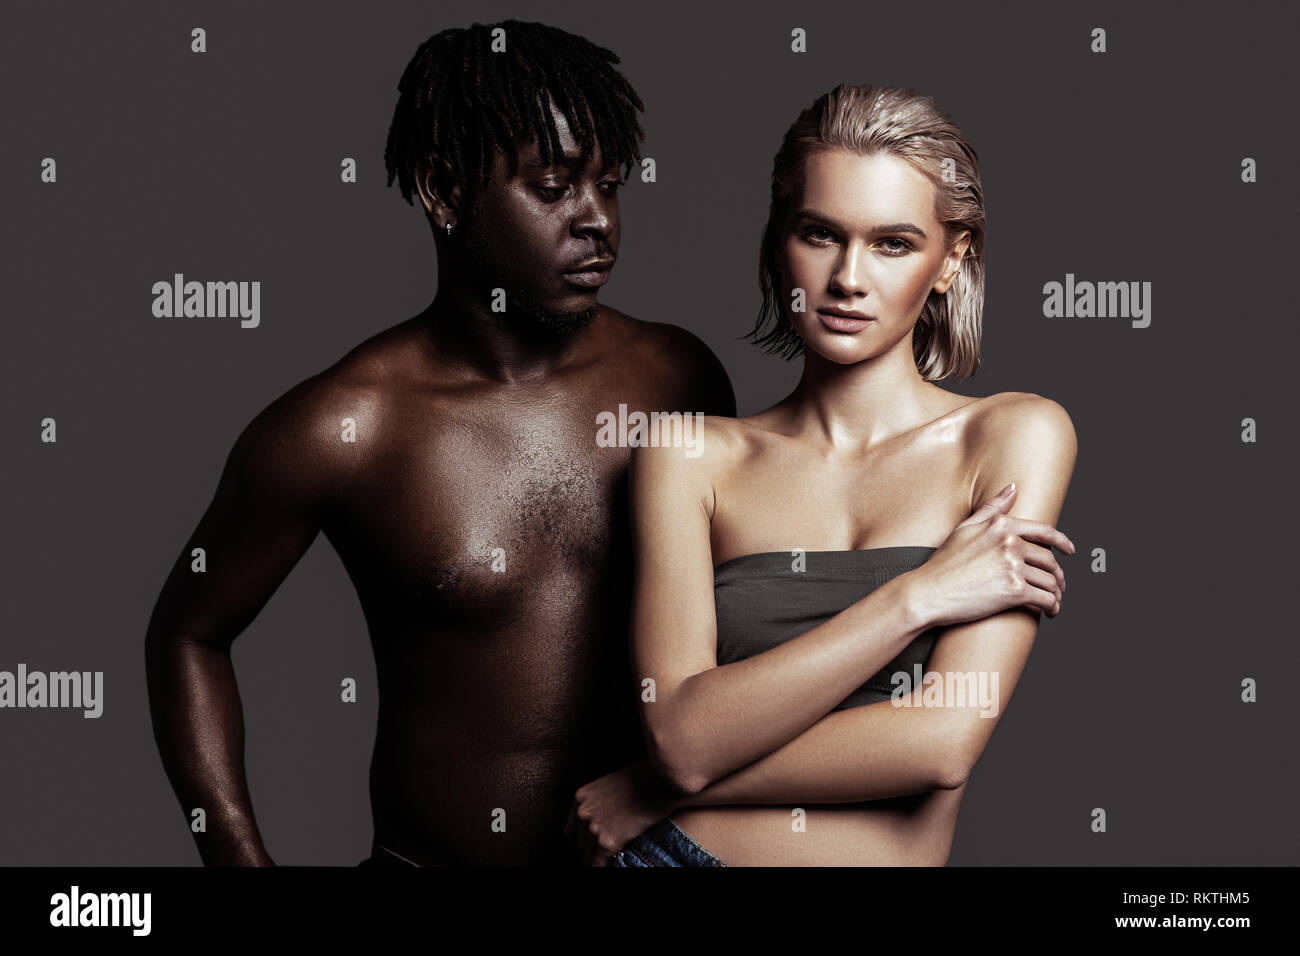 Model with dreadlocks looking at his lovely beautiful colleague Stock Photo